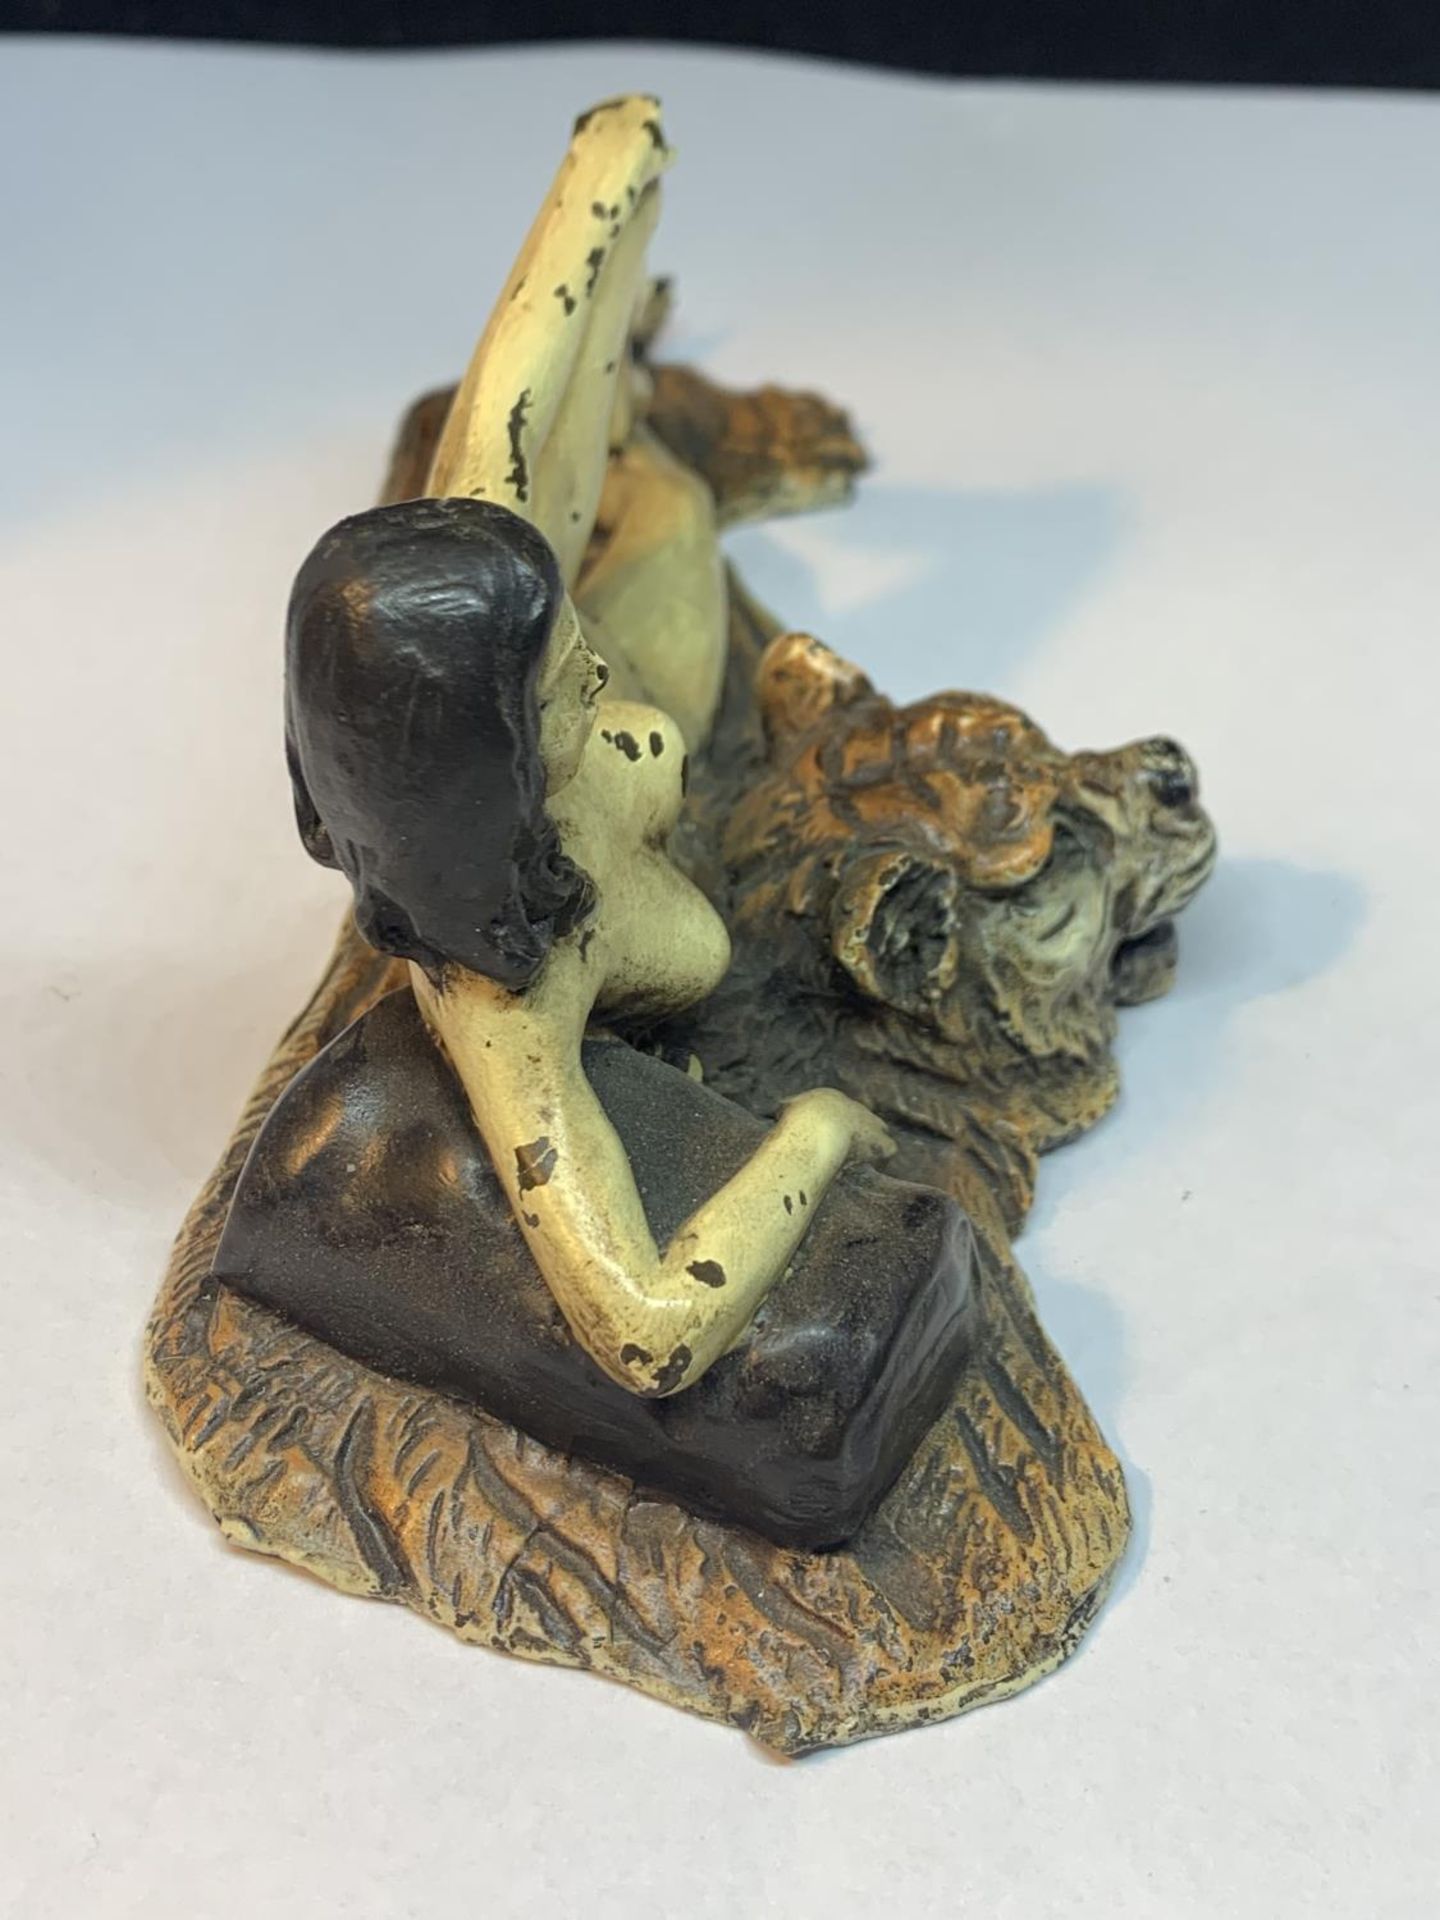 A COLD PAINTED BRONZE FIGURINE OF A NUDE LADY LYING ON A TIGER RUG - Image 3 of 4